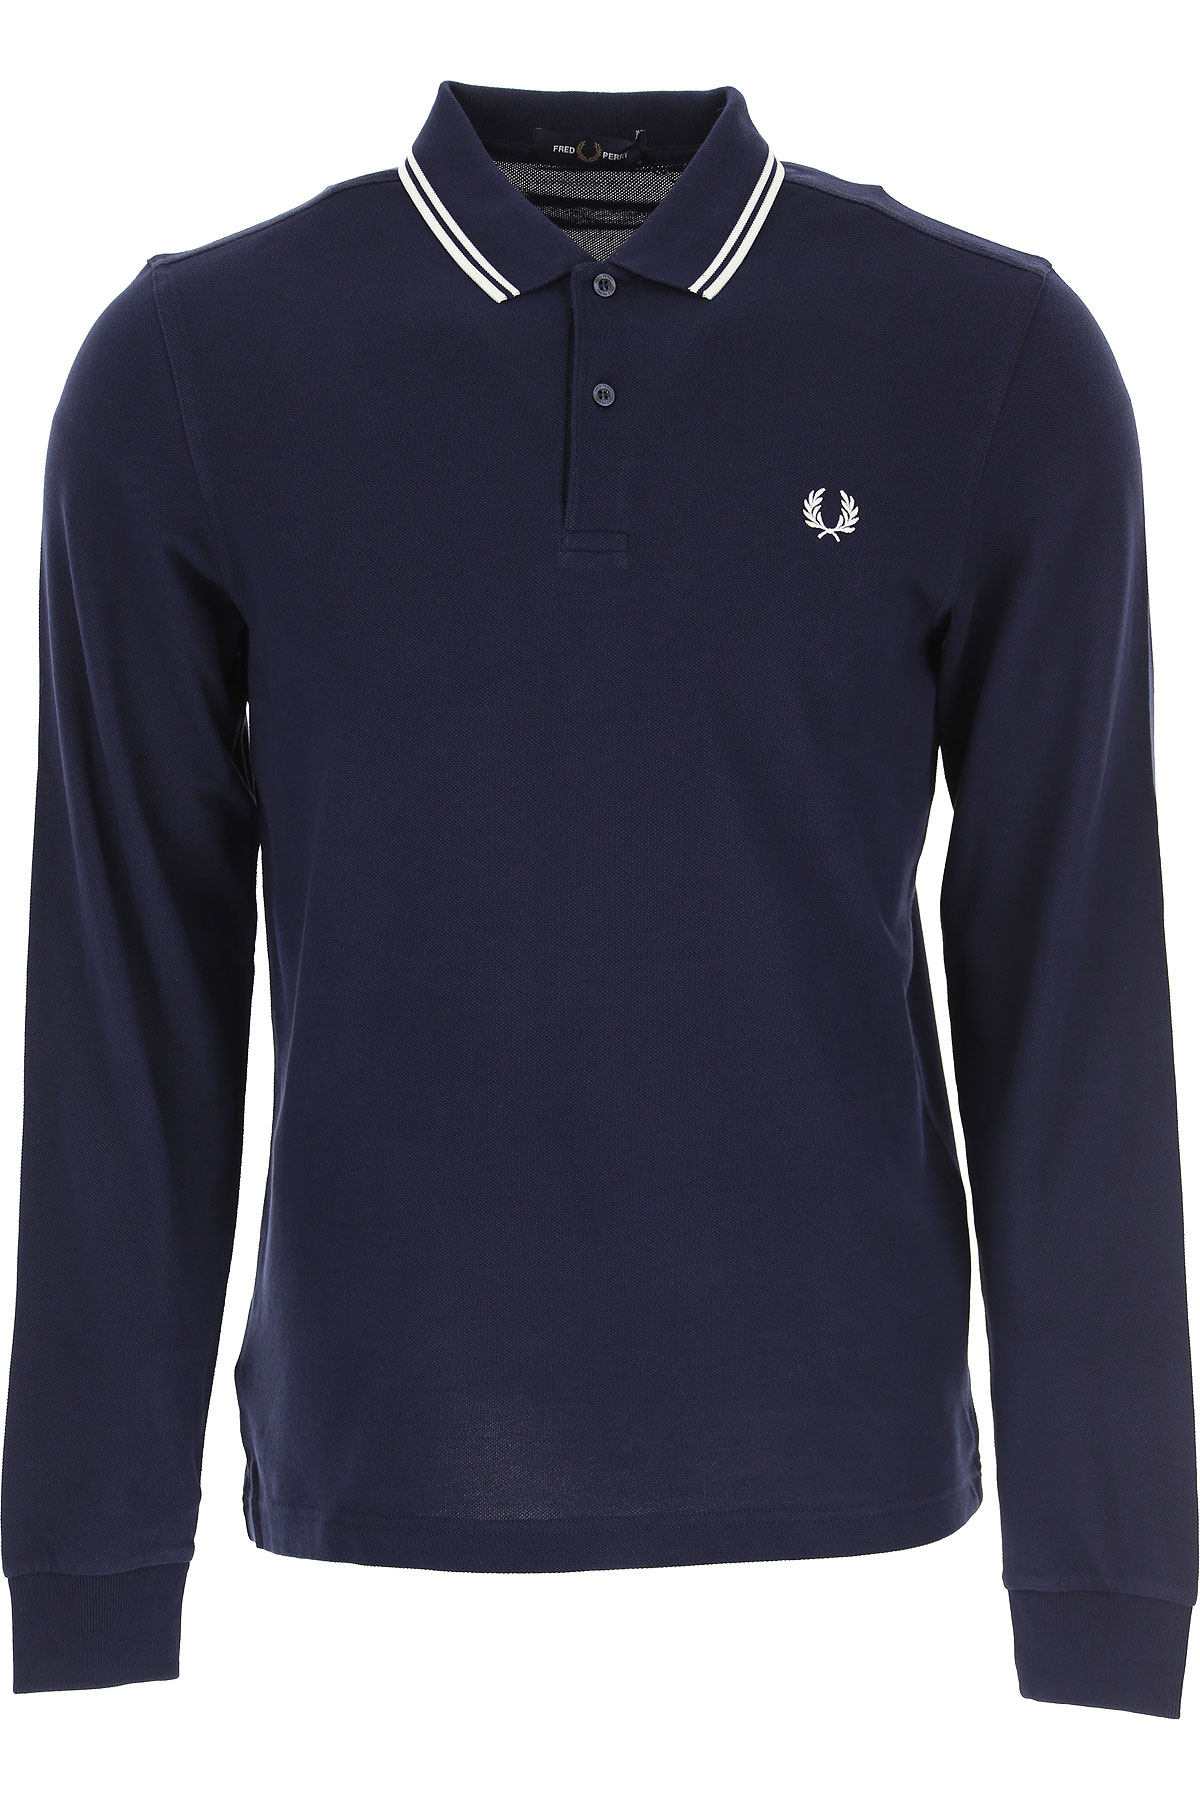 Mens Clothing Fred Perry, Style code: m3636-i86-